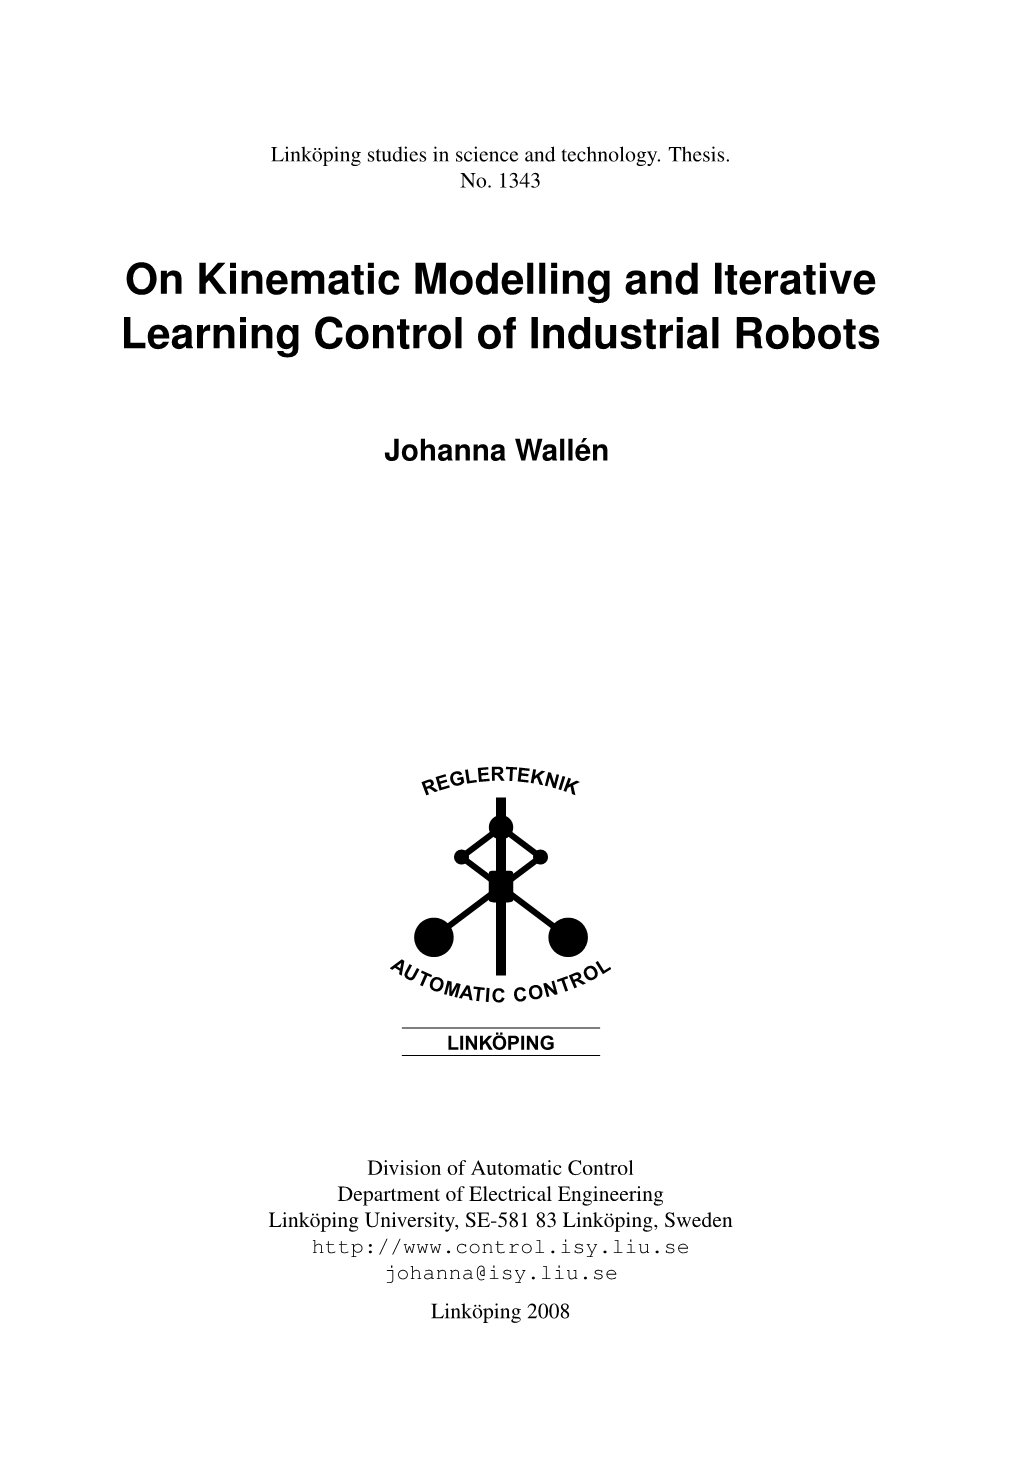 On Kinematic Modelling and Iterative Learning Control of Industrial Robots